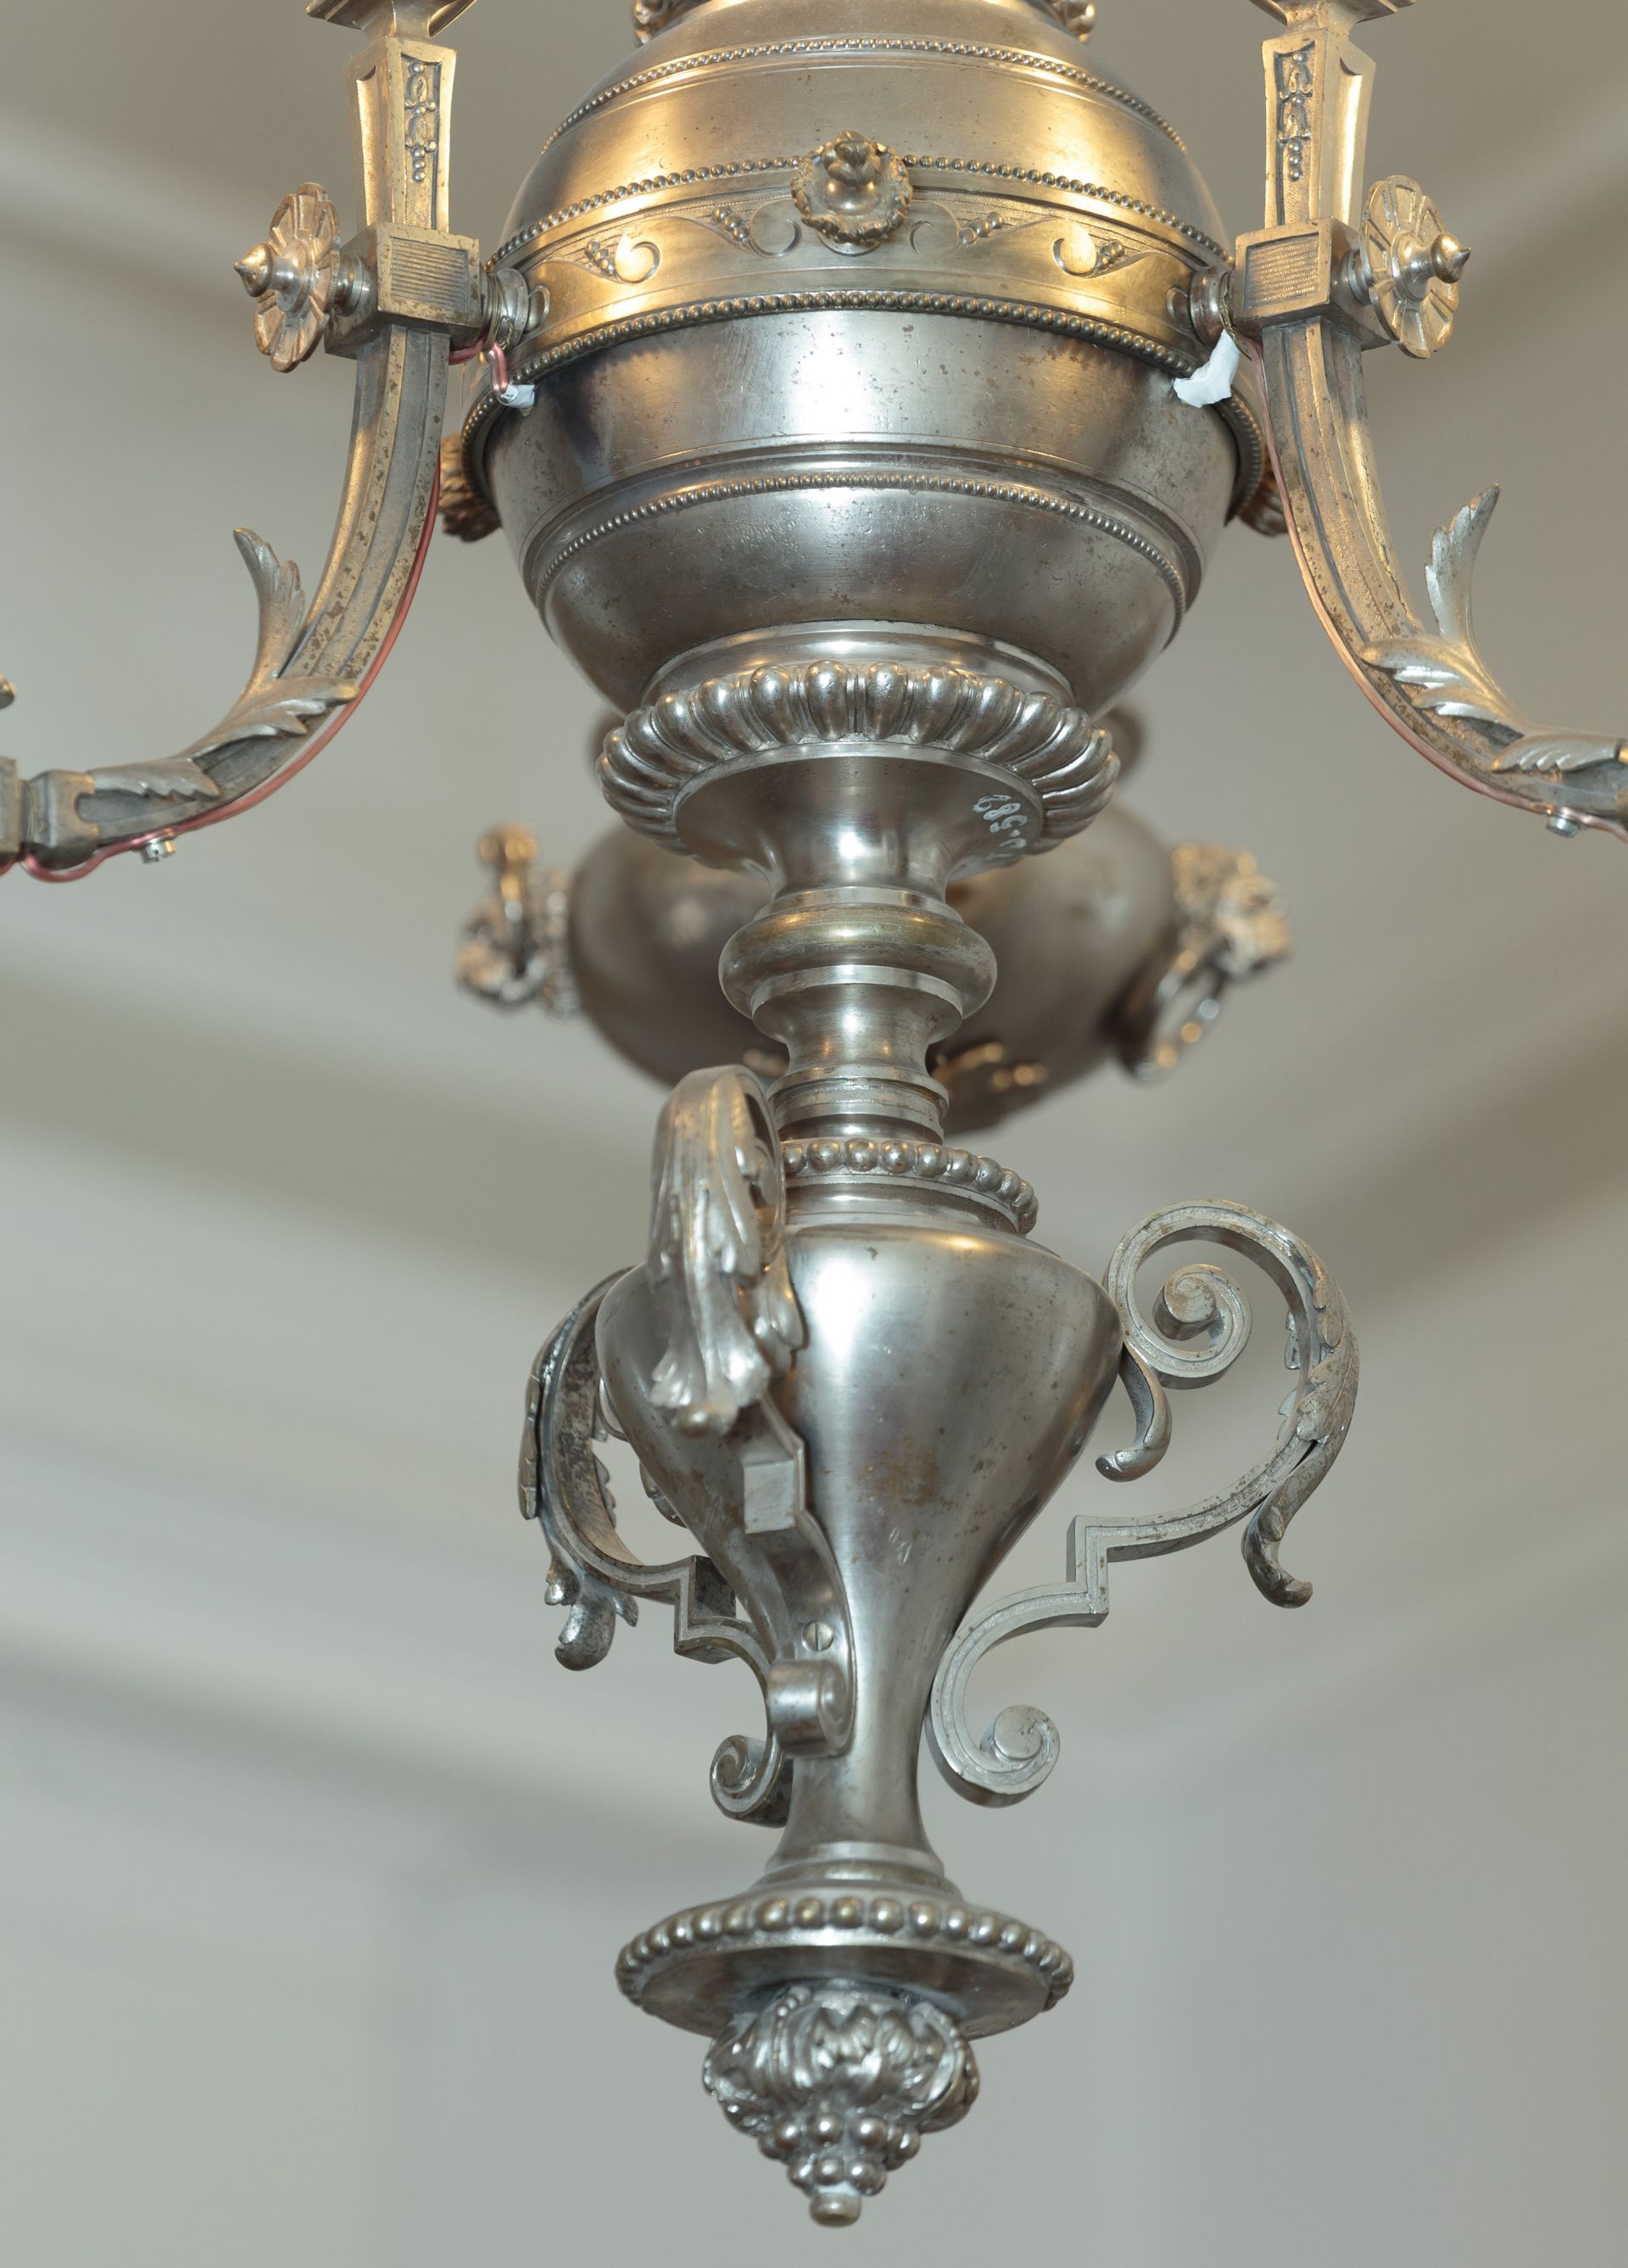 Fragment of chandelier, 1837–1899, Lithuanian National Museum of Art, TD-589. Photo by Tomas Kapočius, 2017